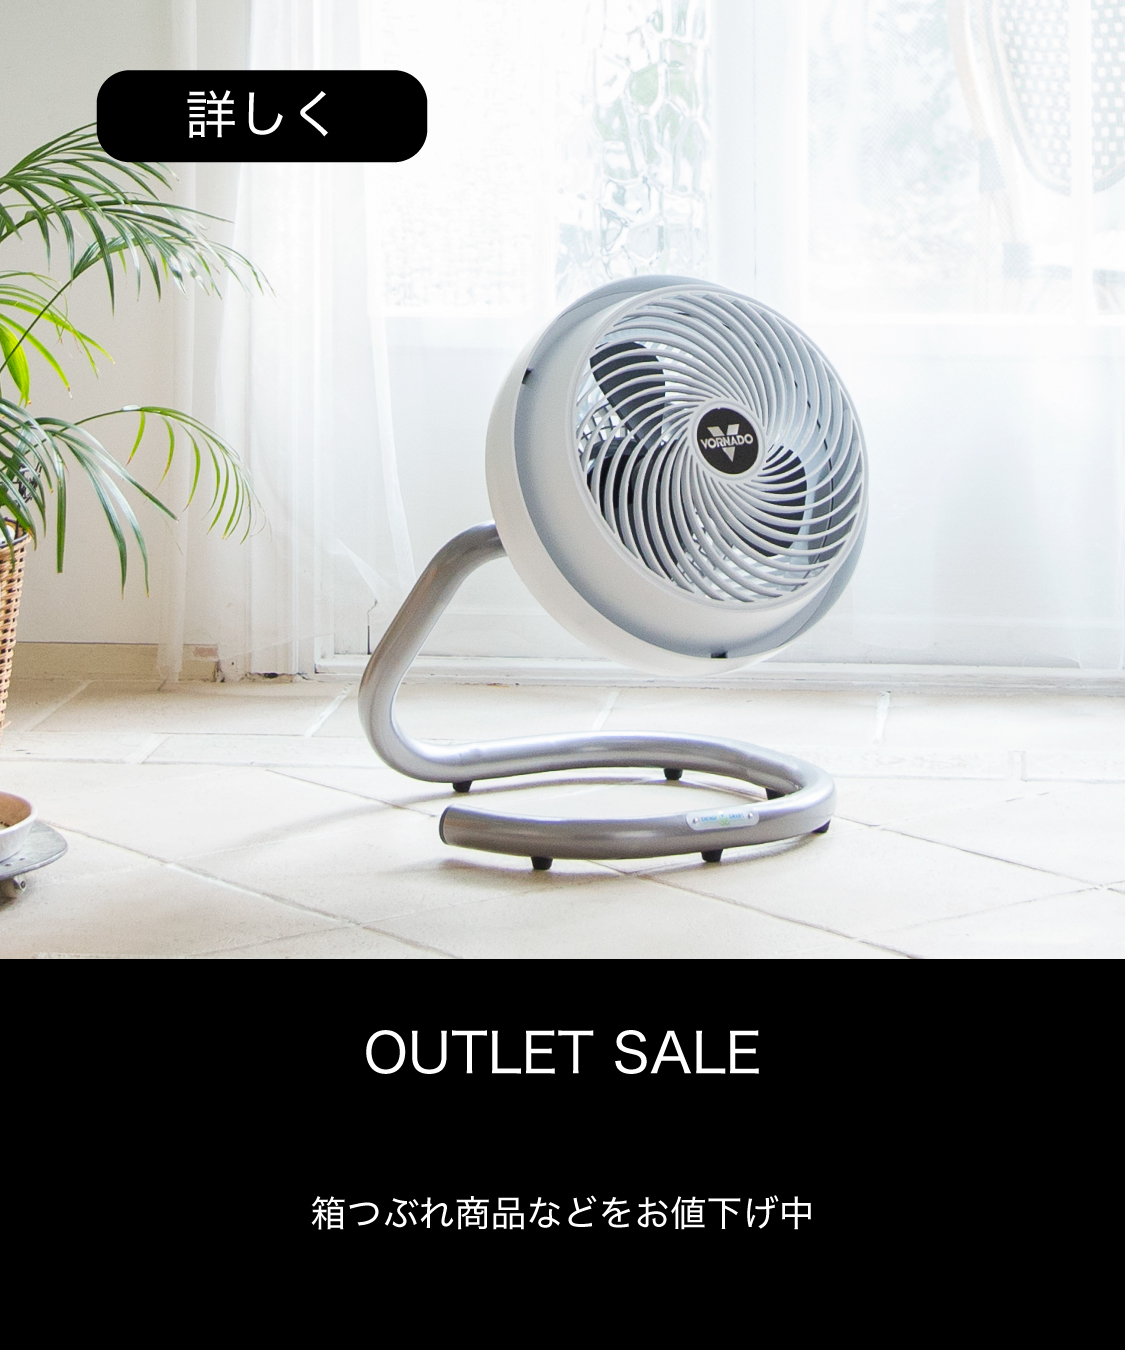 OUTLET SALE 箱つぶれ商品などをお値下げ中